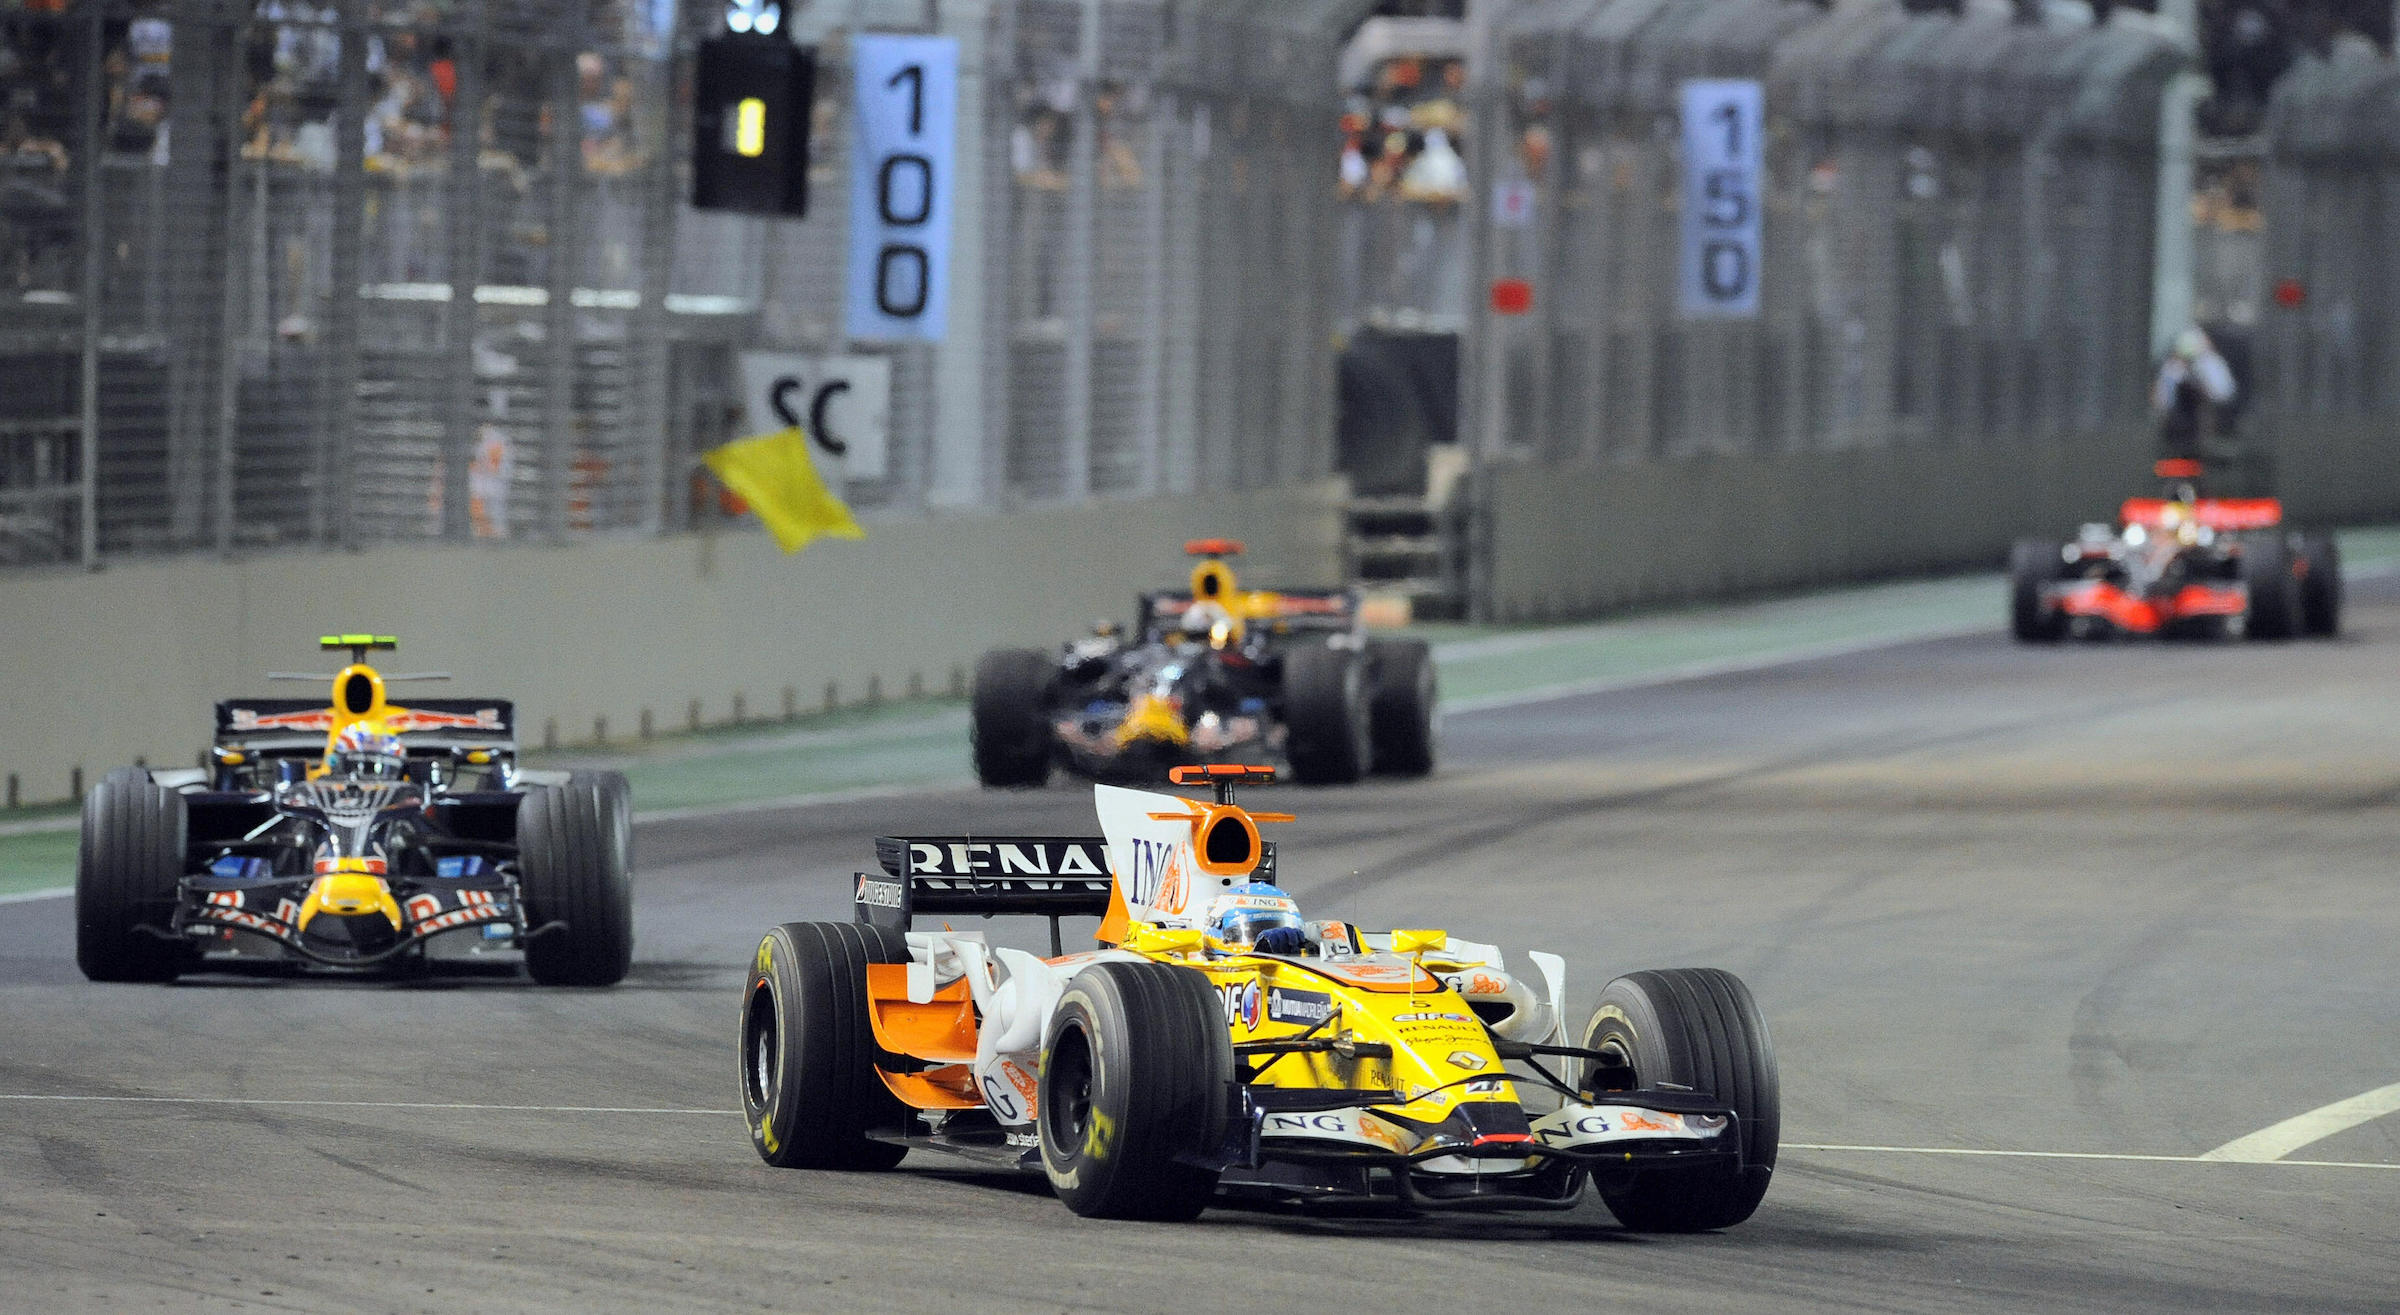 Scandal tainted Formula 1’s first night race in 2008